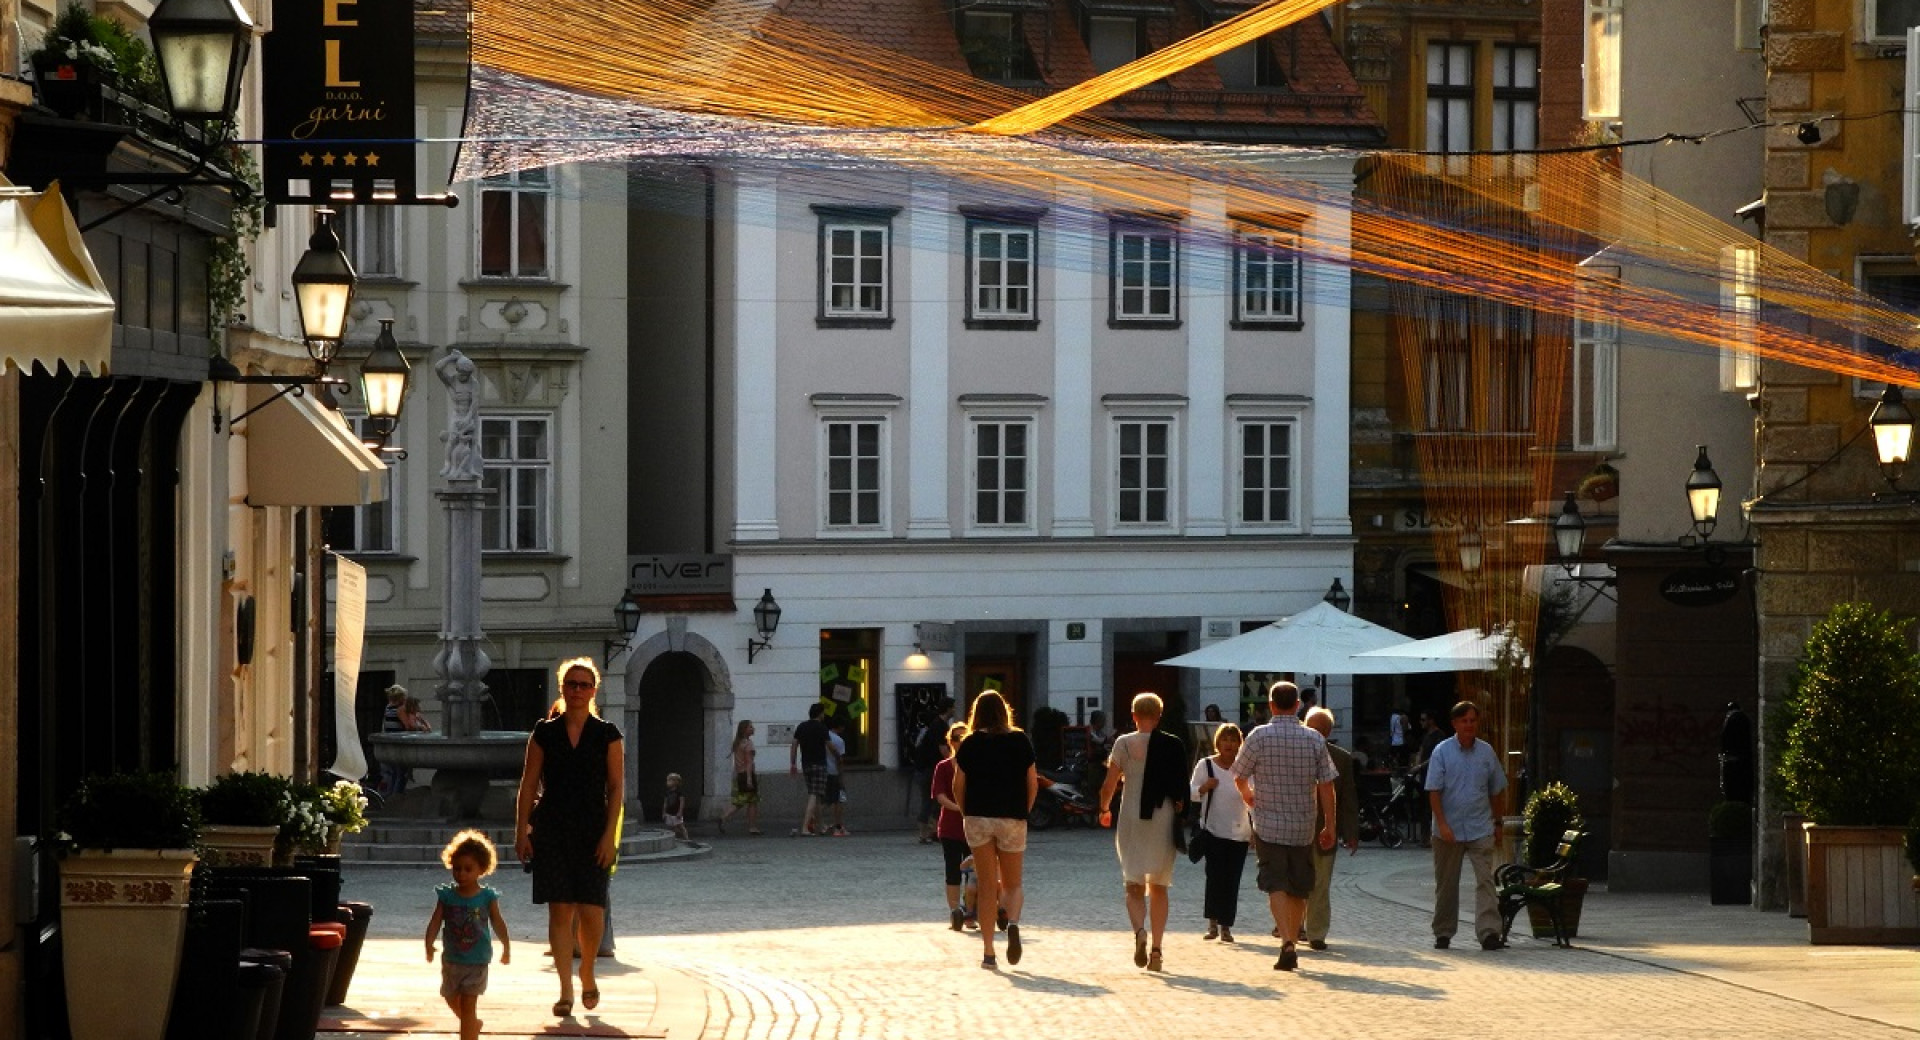 People walking in a big sun-lit city square.